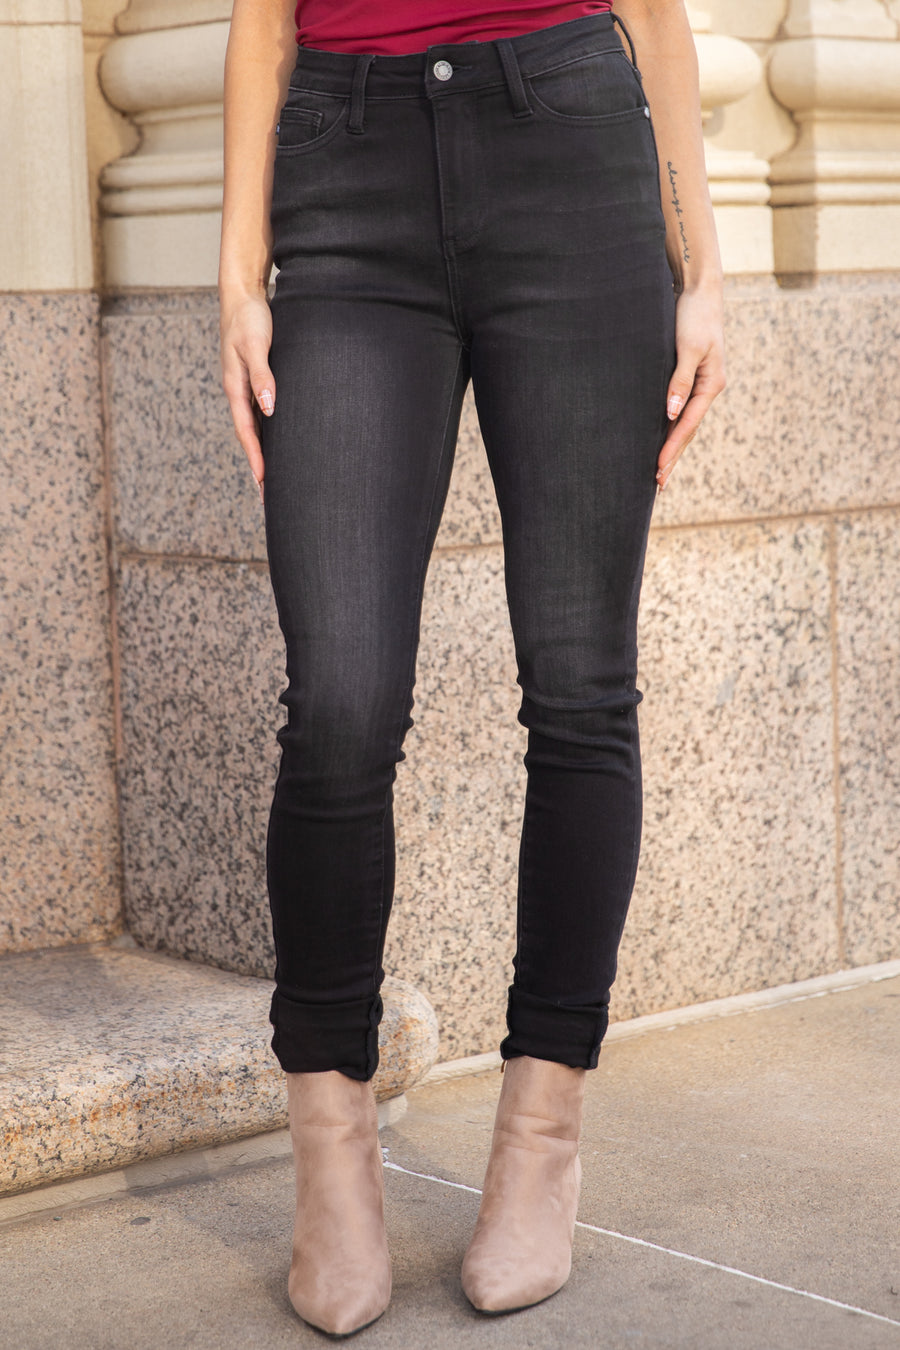 Judy Blue Black High Rise Skinny Jeans - Filly Flair